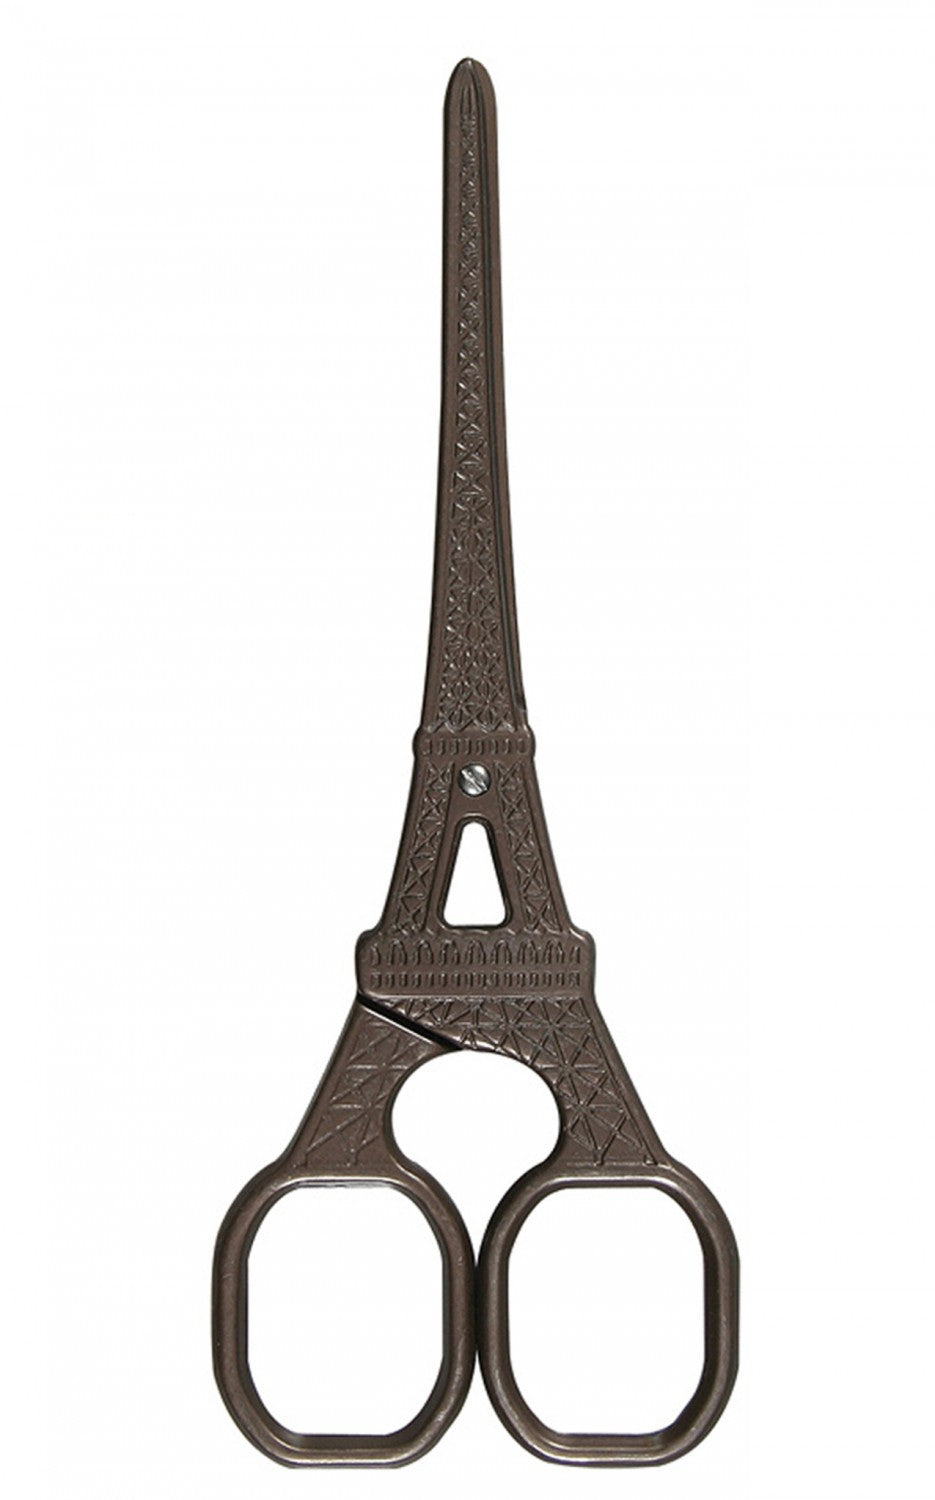 Brass Eiffel Tower Scissors by Products from Abroad